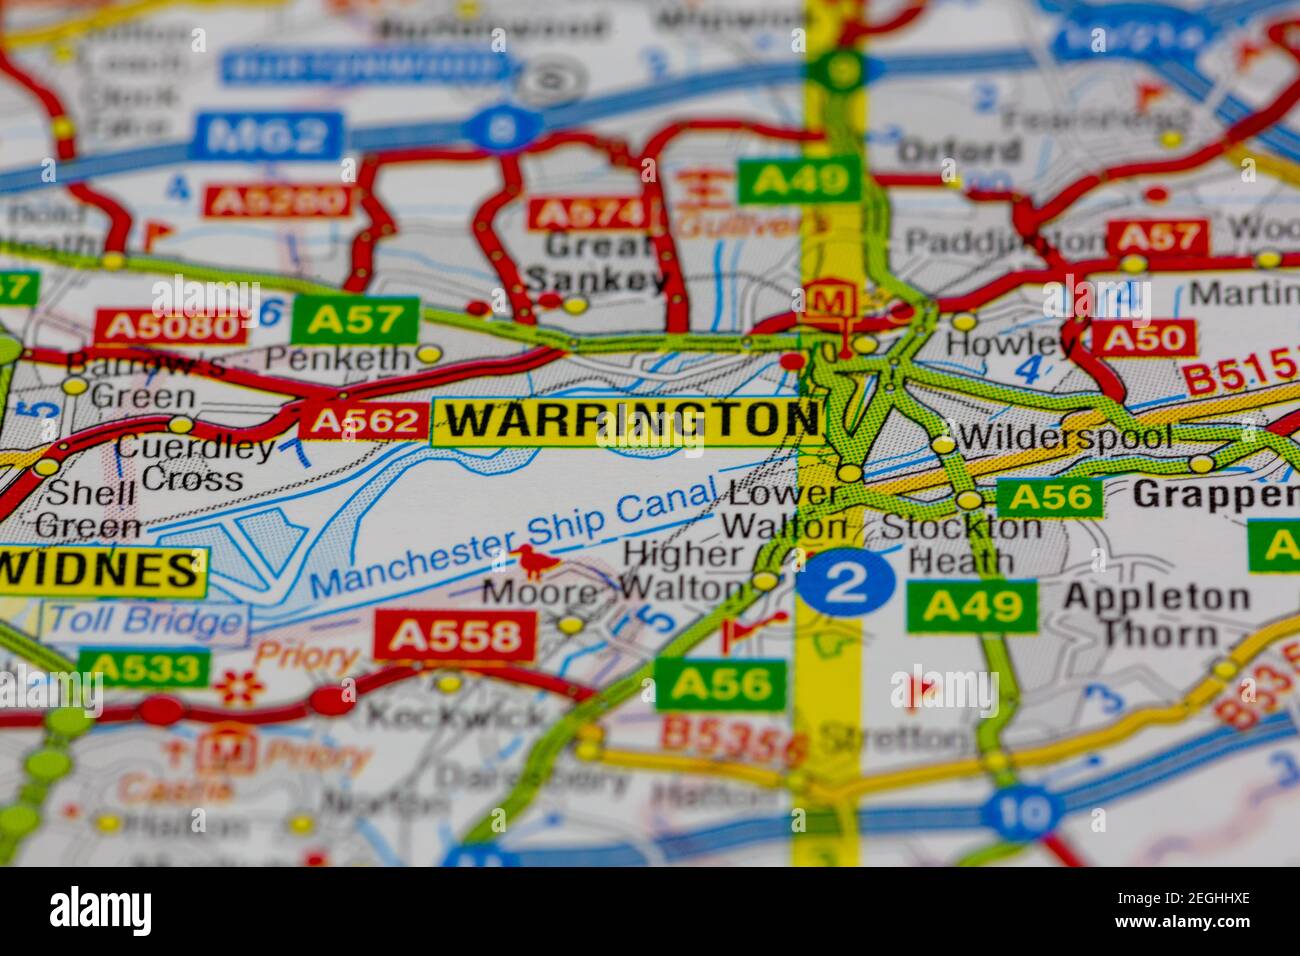 Warrington and surrounding areas shown on a road map or geography map Stock Photo